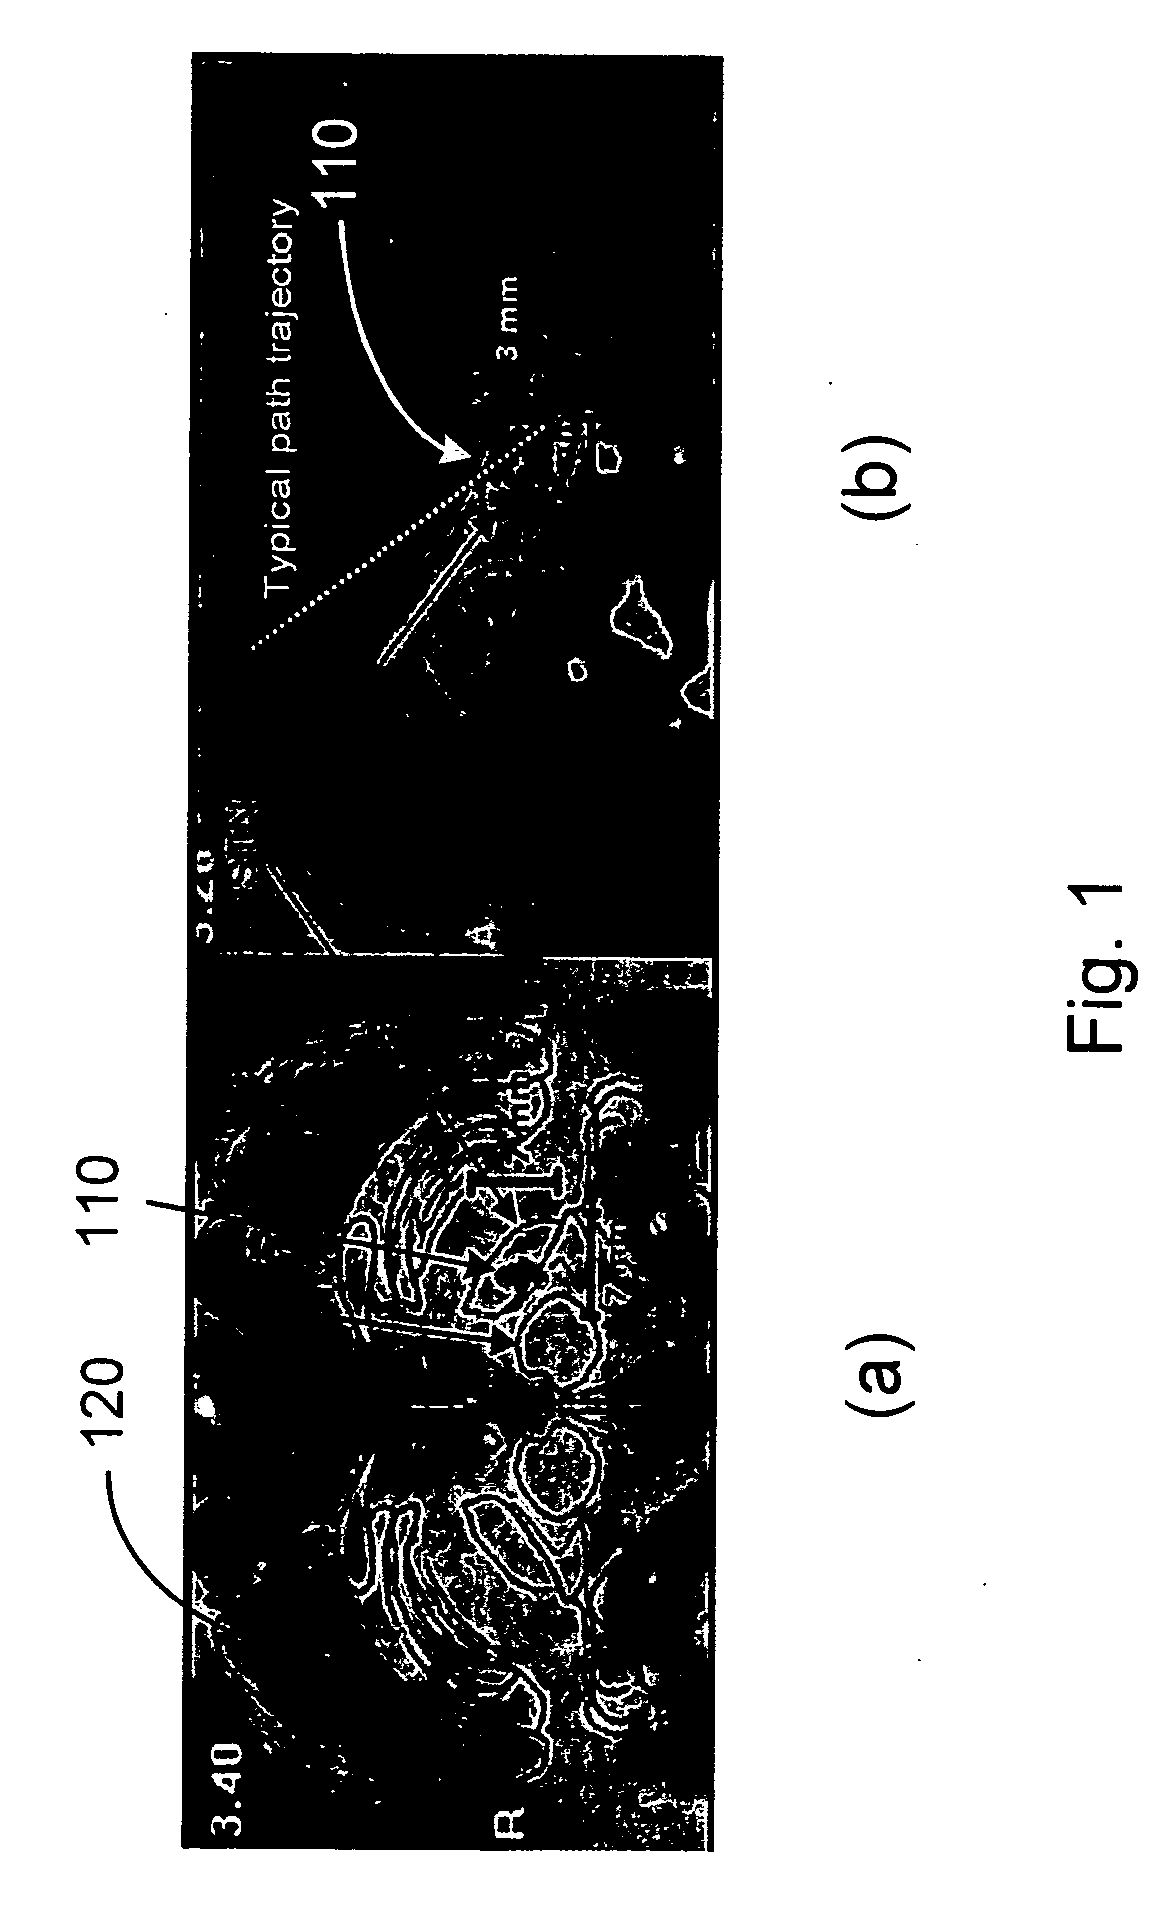 System and methods of deep brain stimulation for post-operation patients